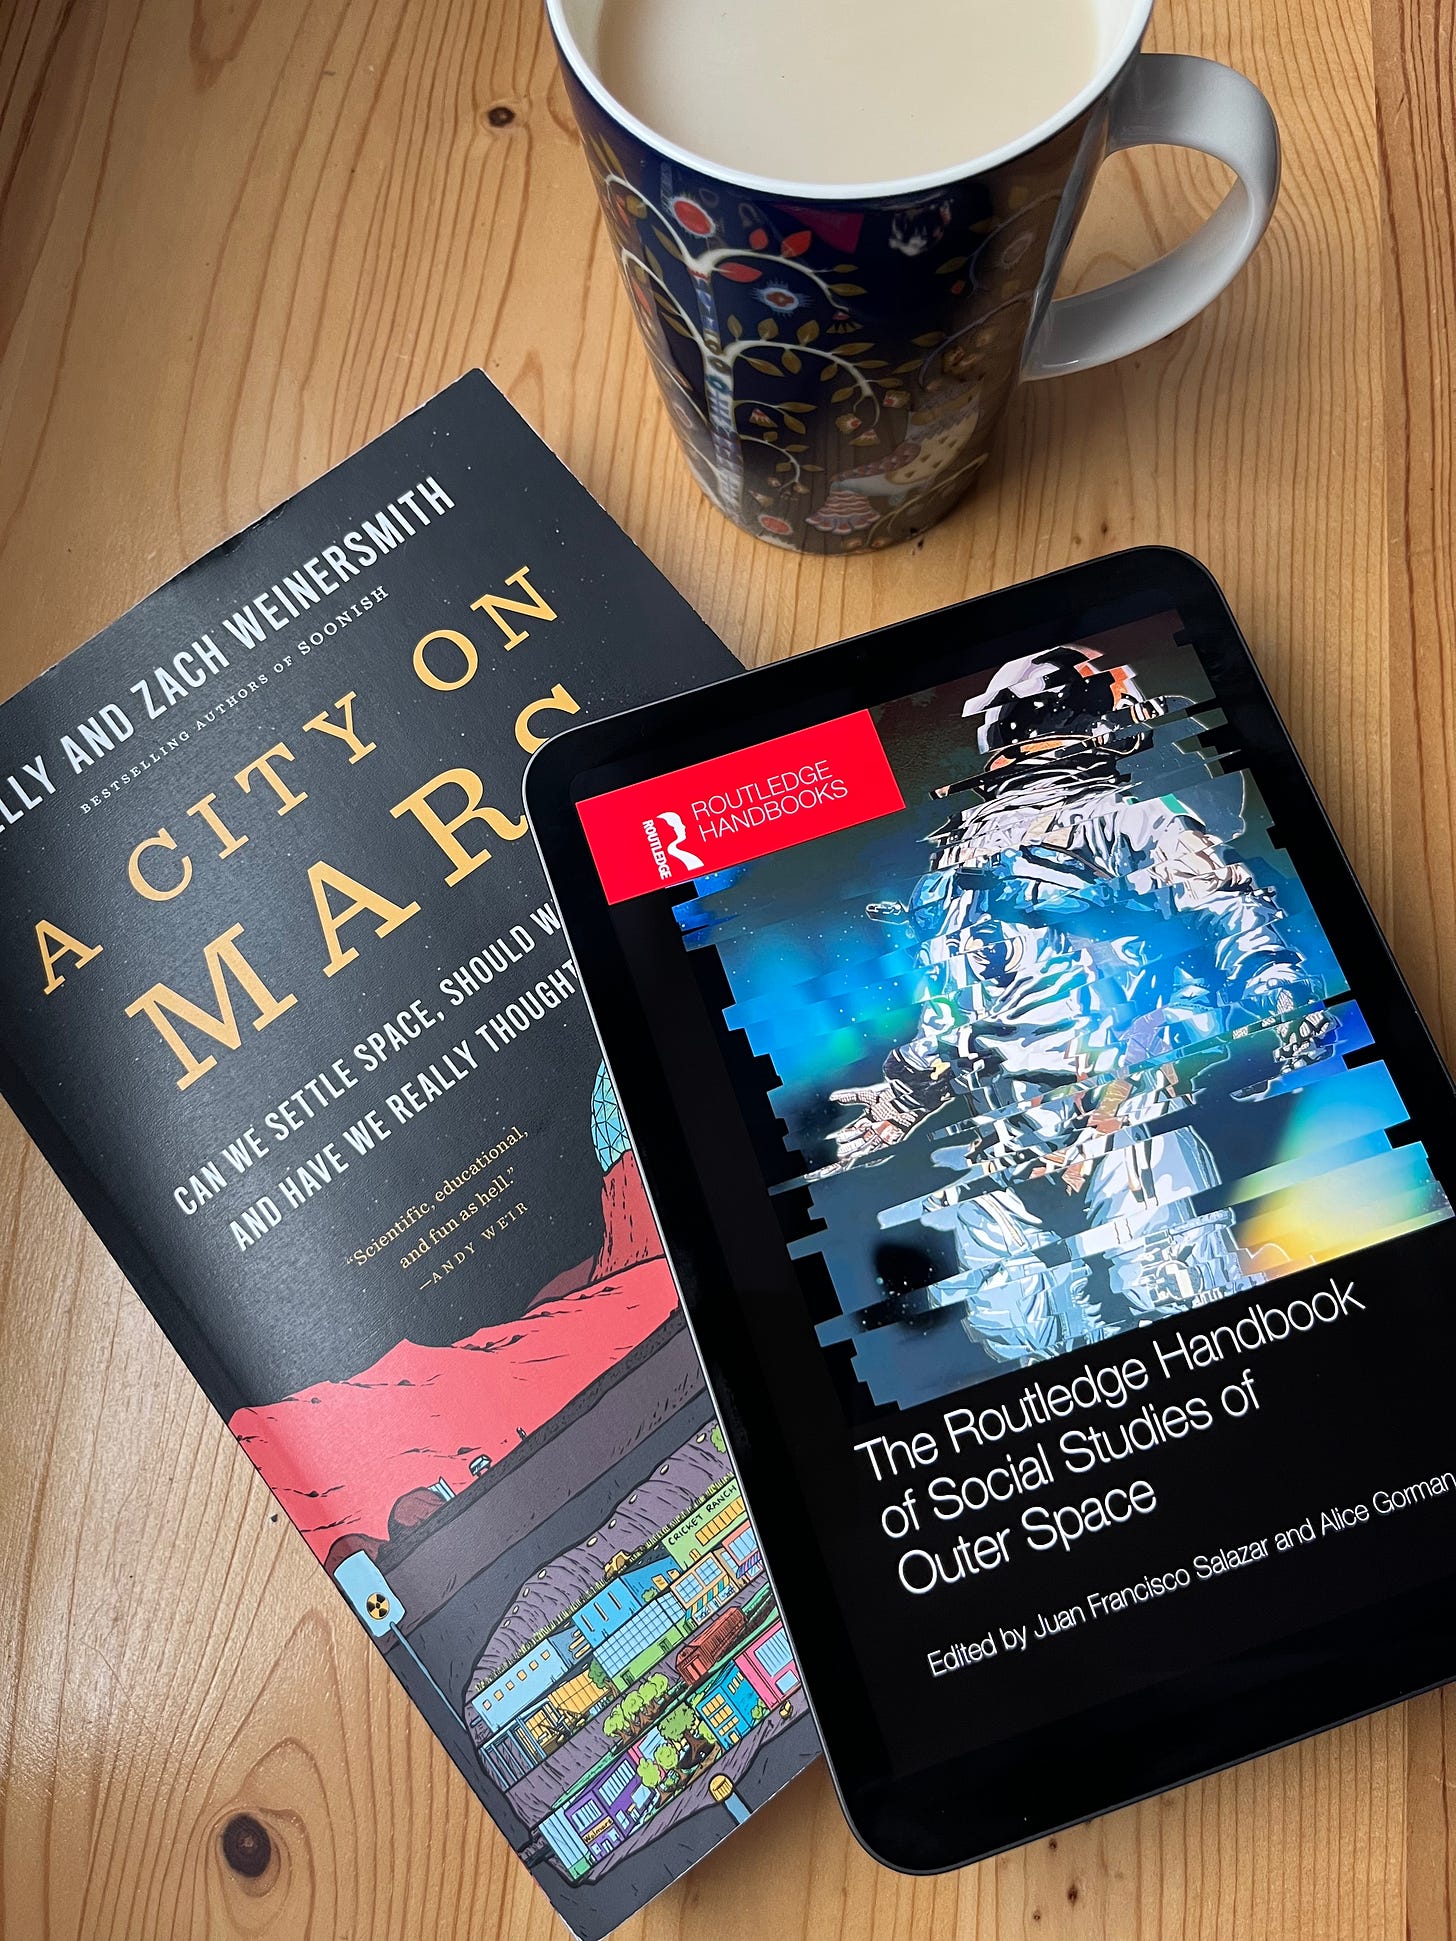 An iPad displaying the cover of the Routledge Handbook sits on top of a paperback copy of A City on Mars, both resting on a wooden surface next to a blue mug of tea.